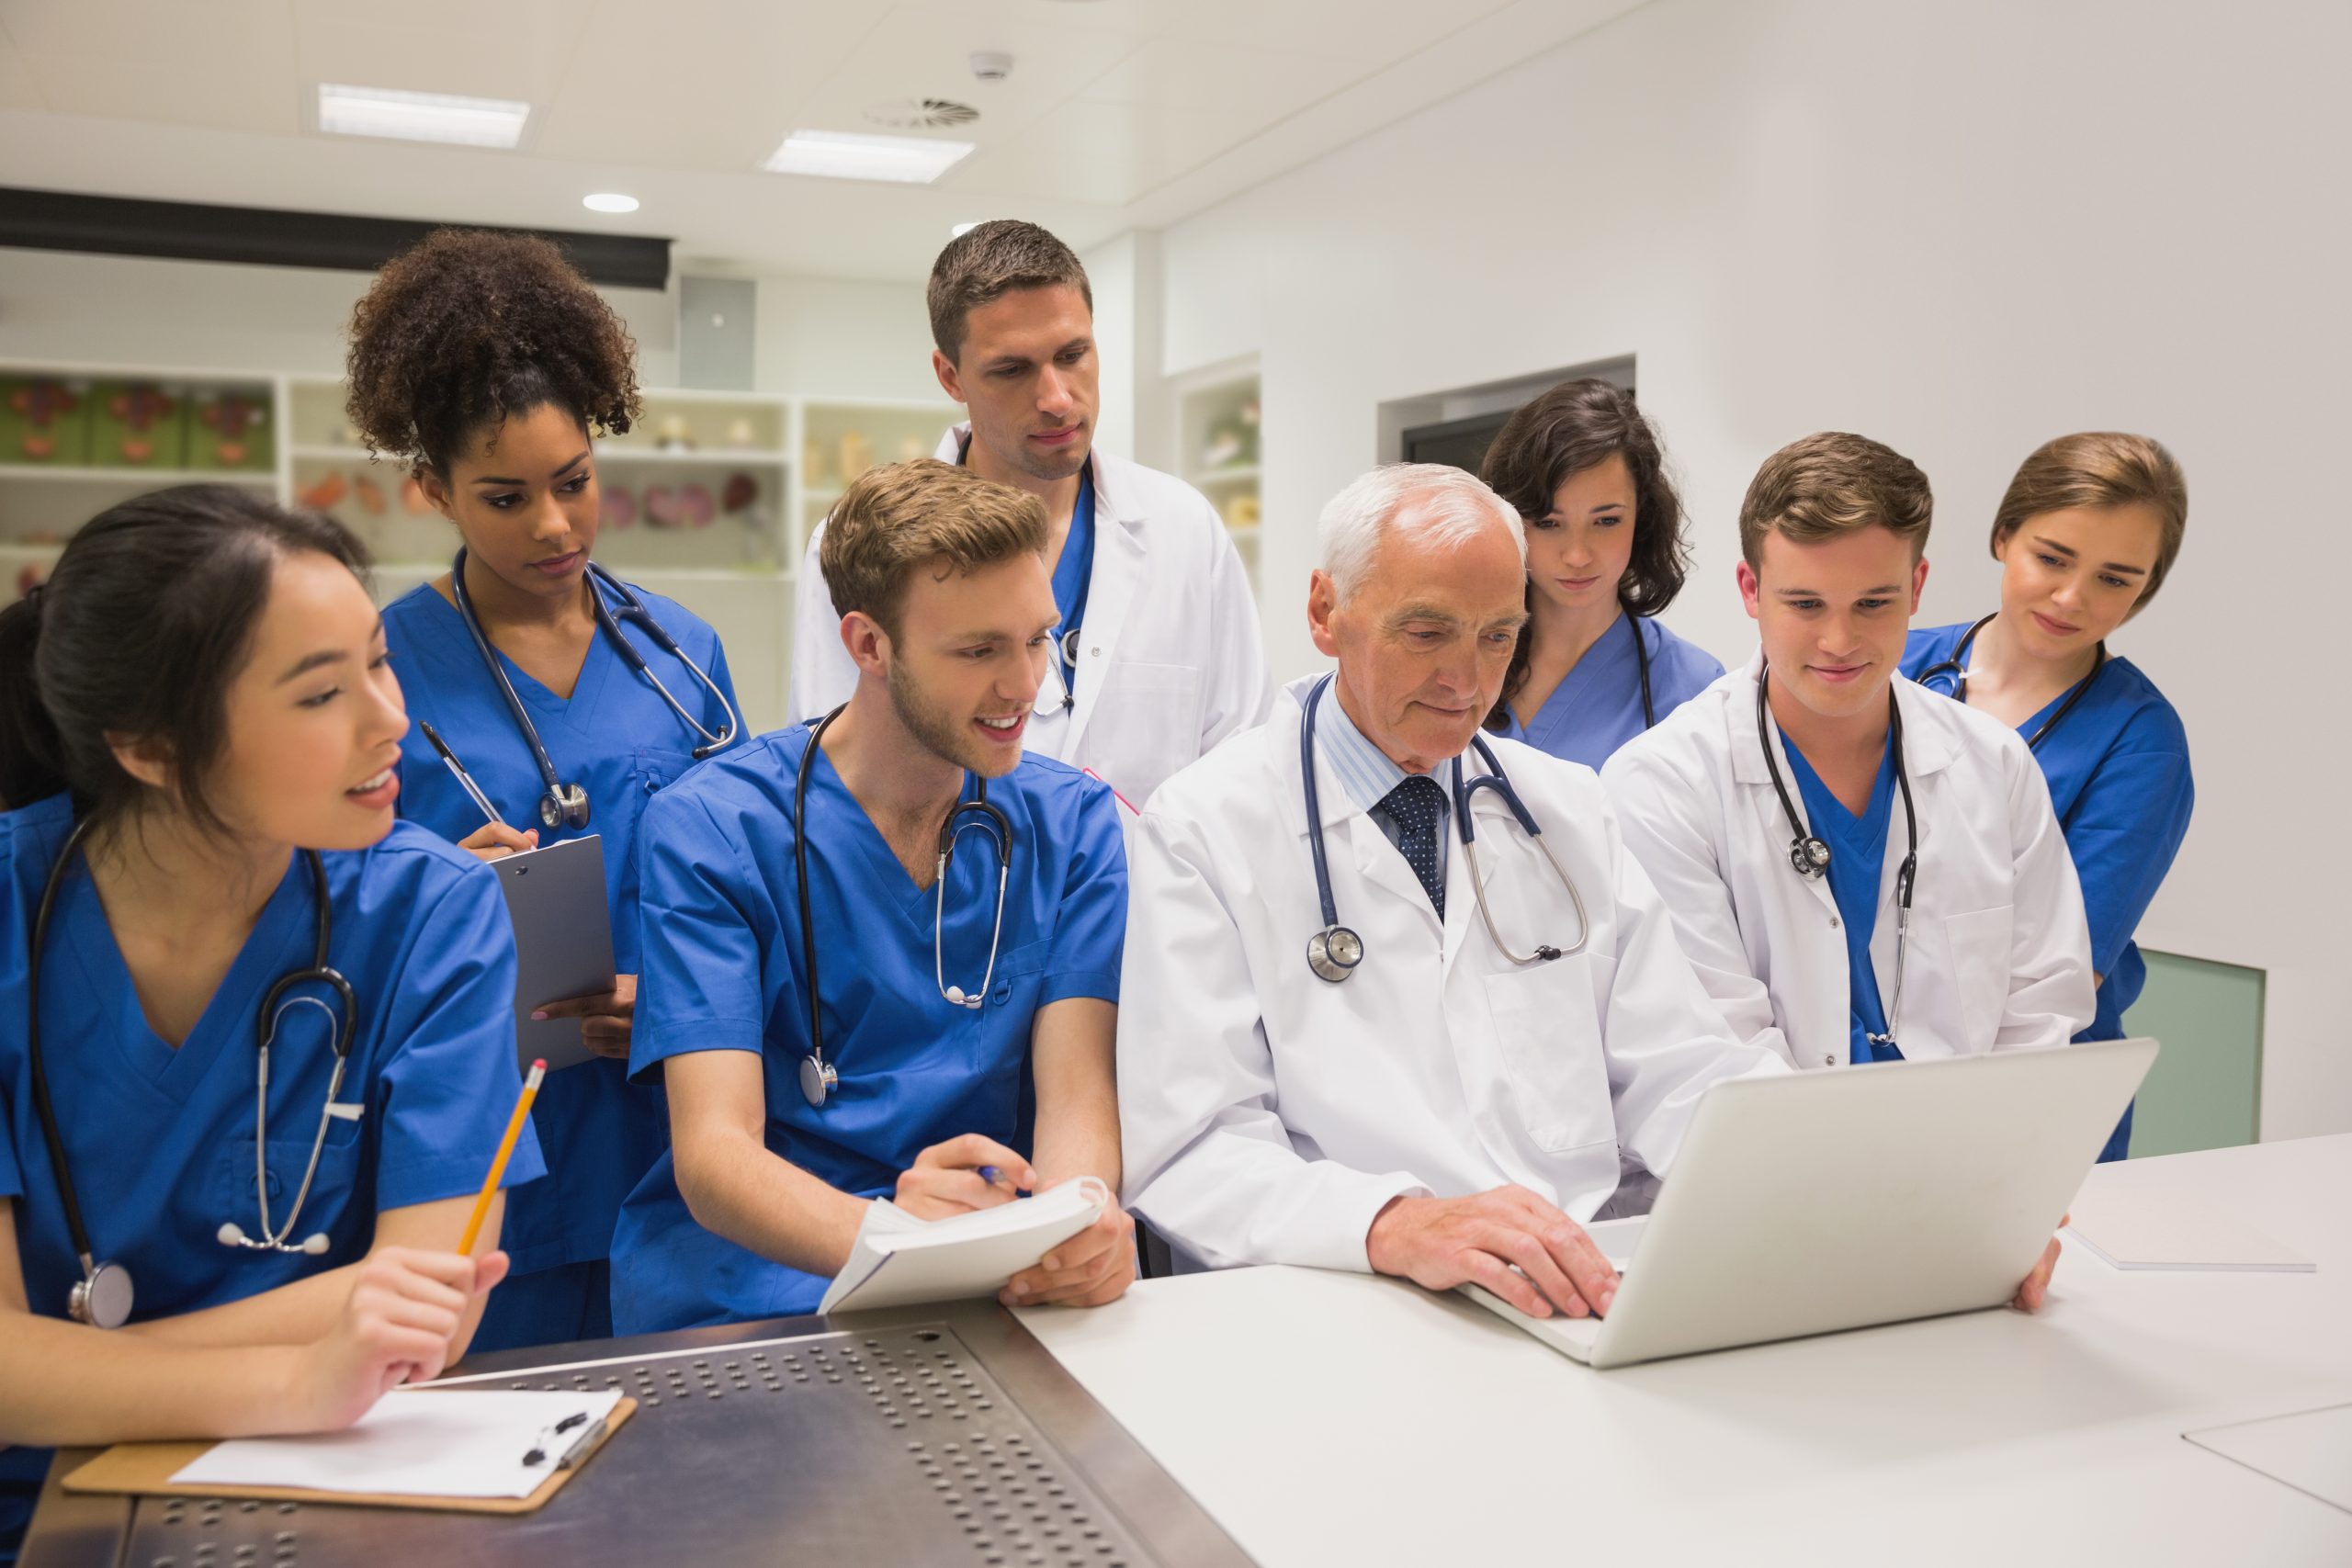 6 medical students in blue scrubs examining the doctor's charts